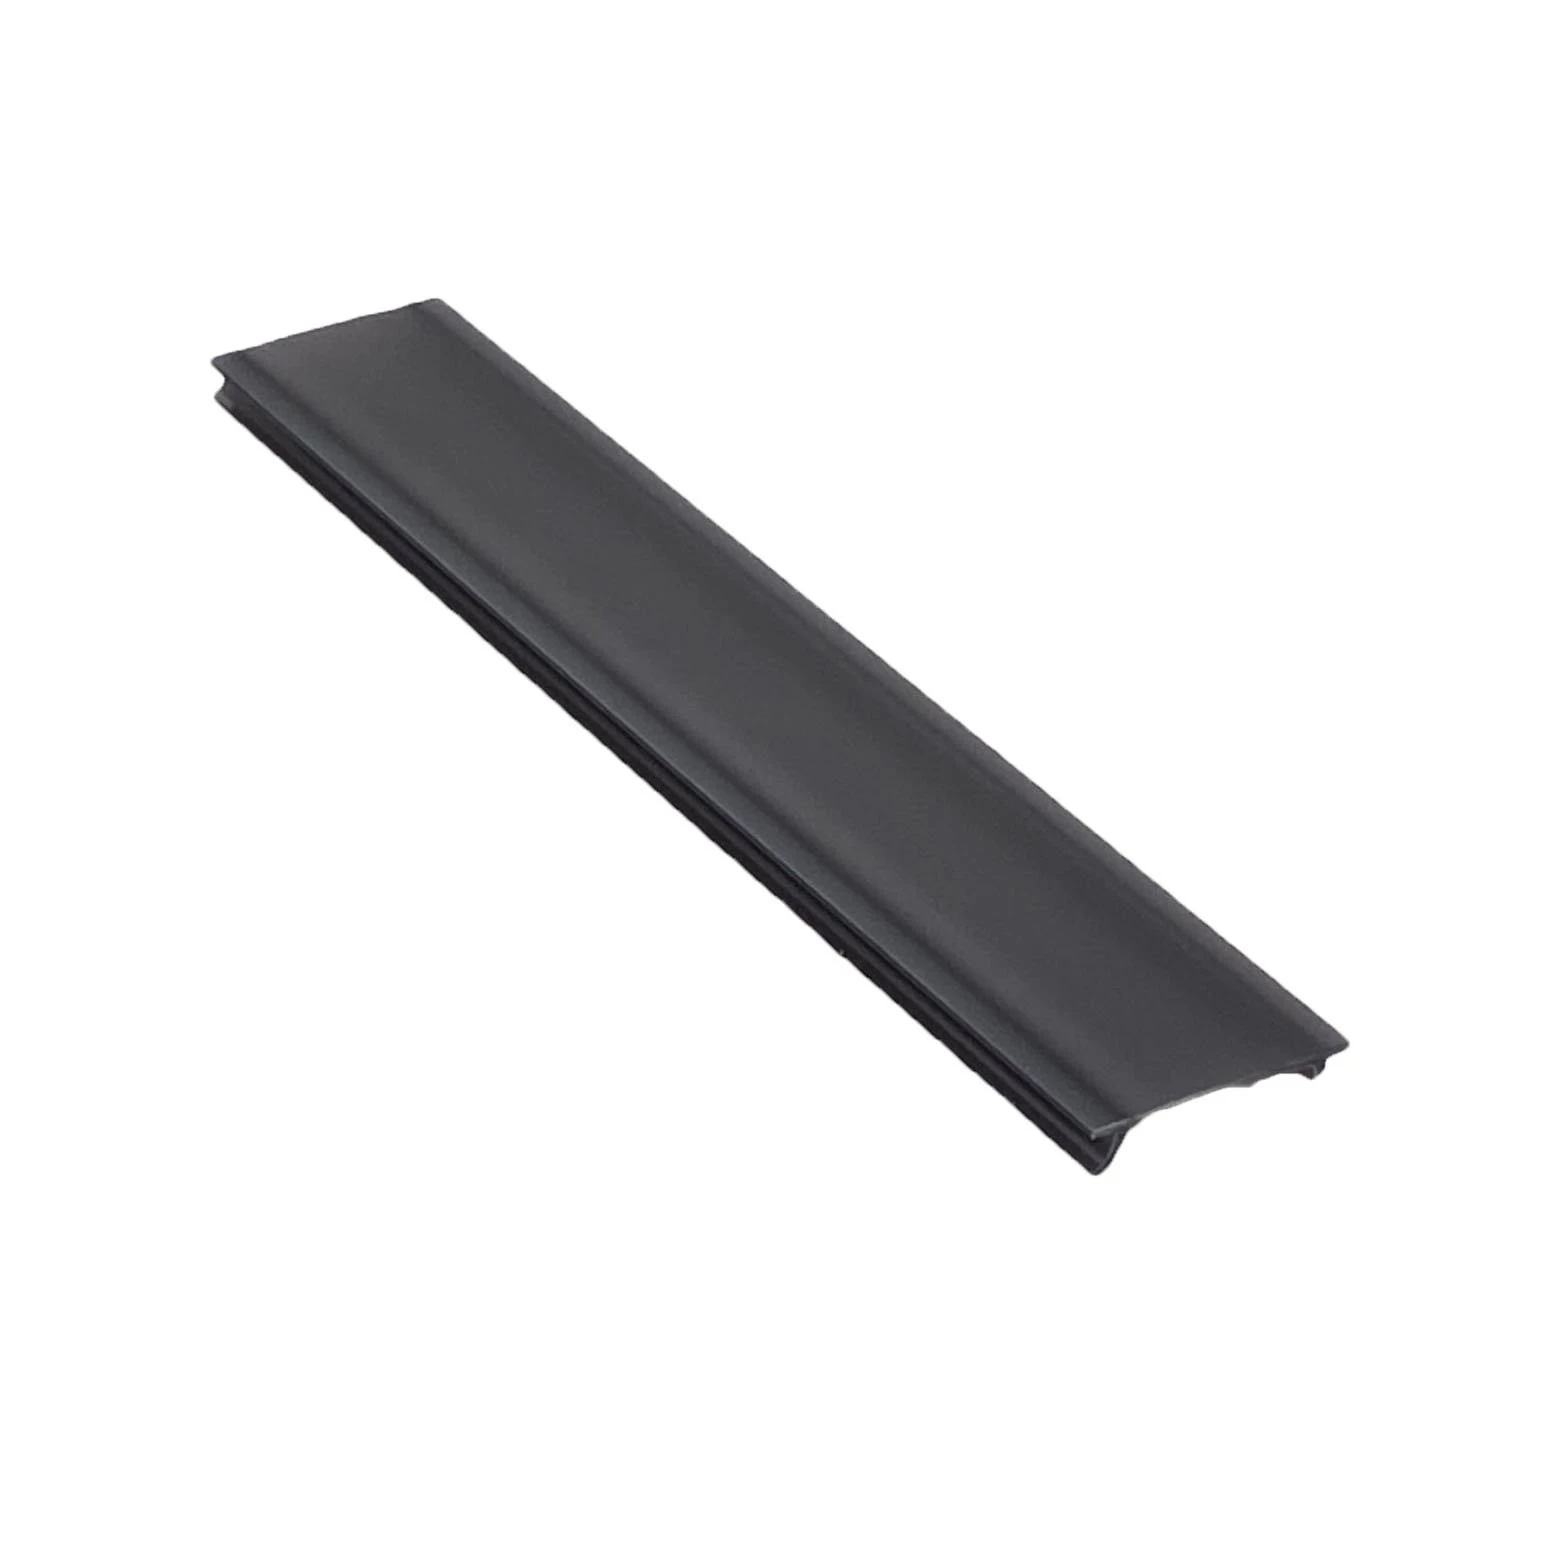 MOSS-ALQ-3015A - Flat - Cover Only - Black - 2.44 Meter